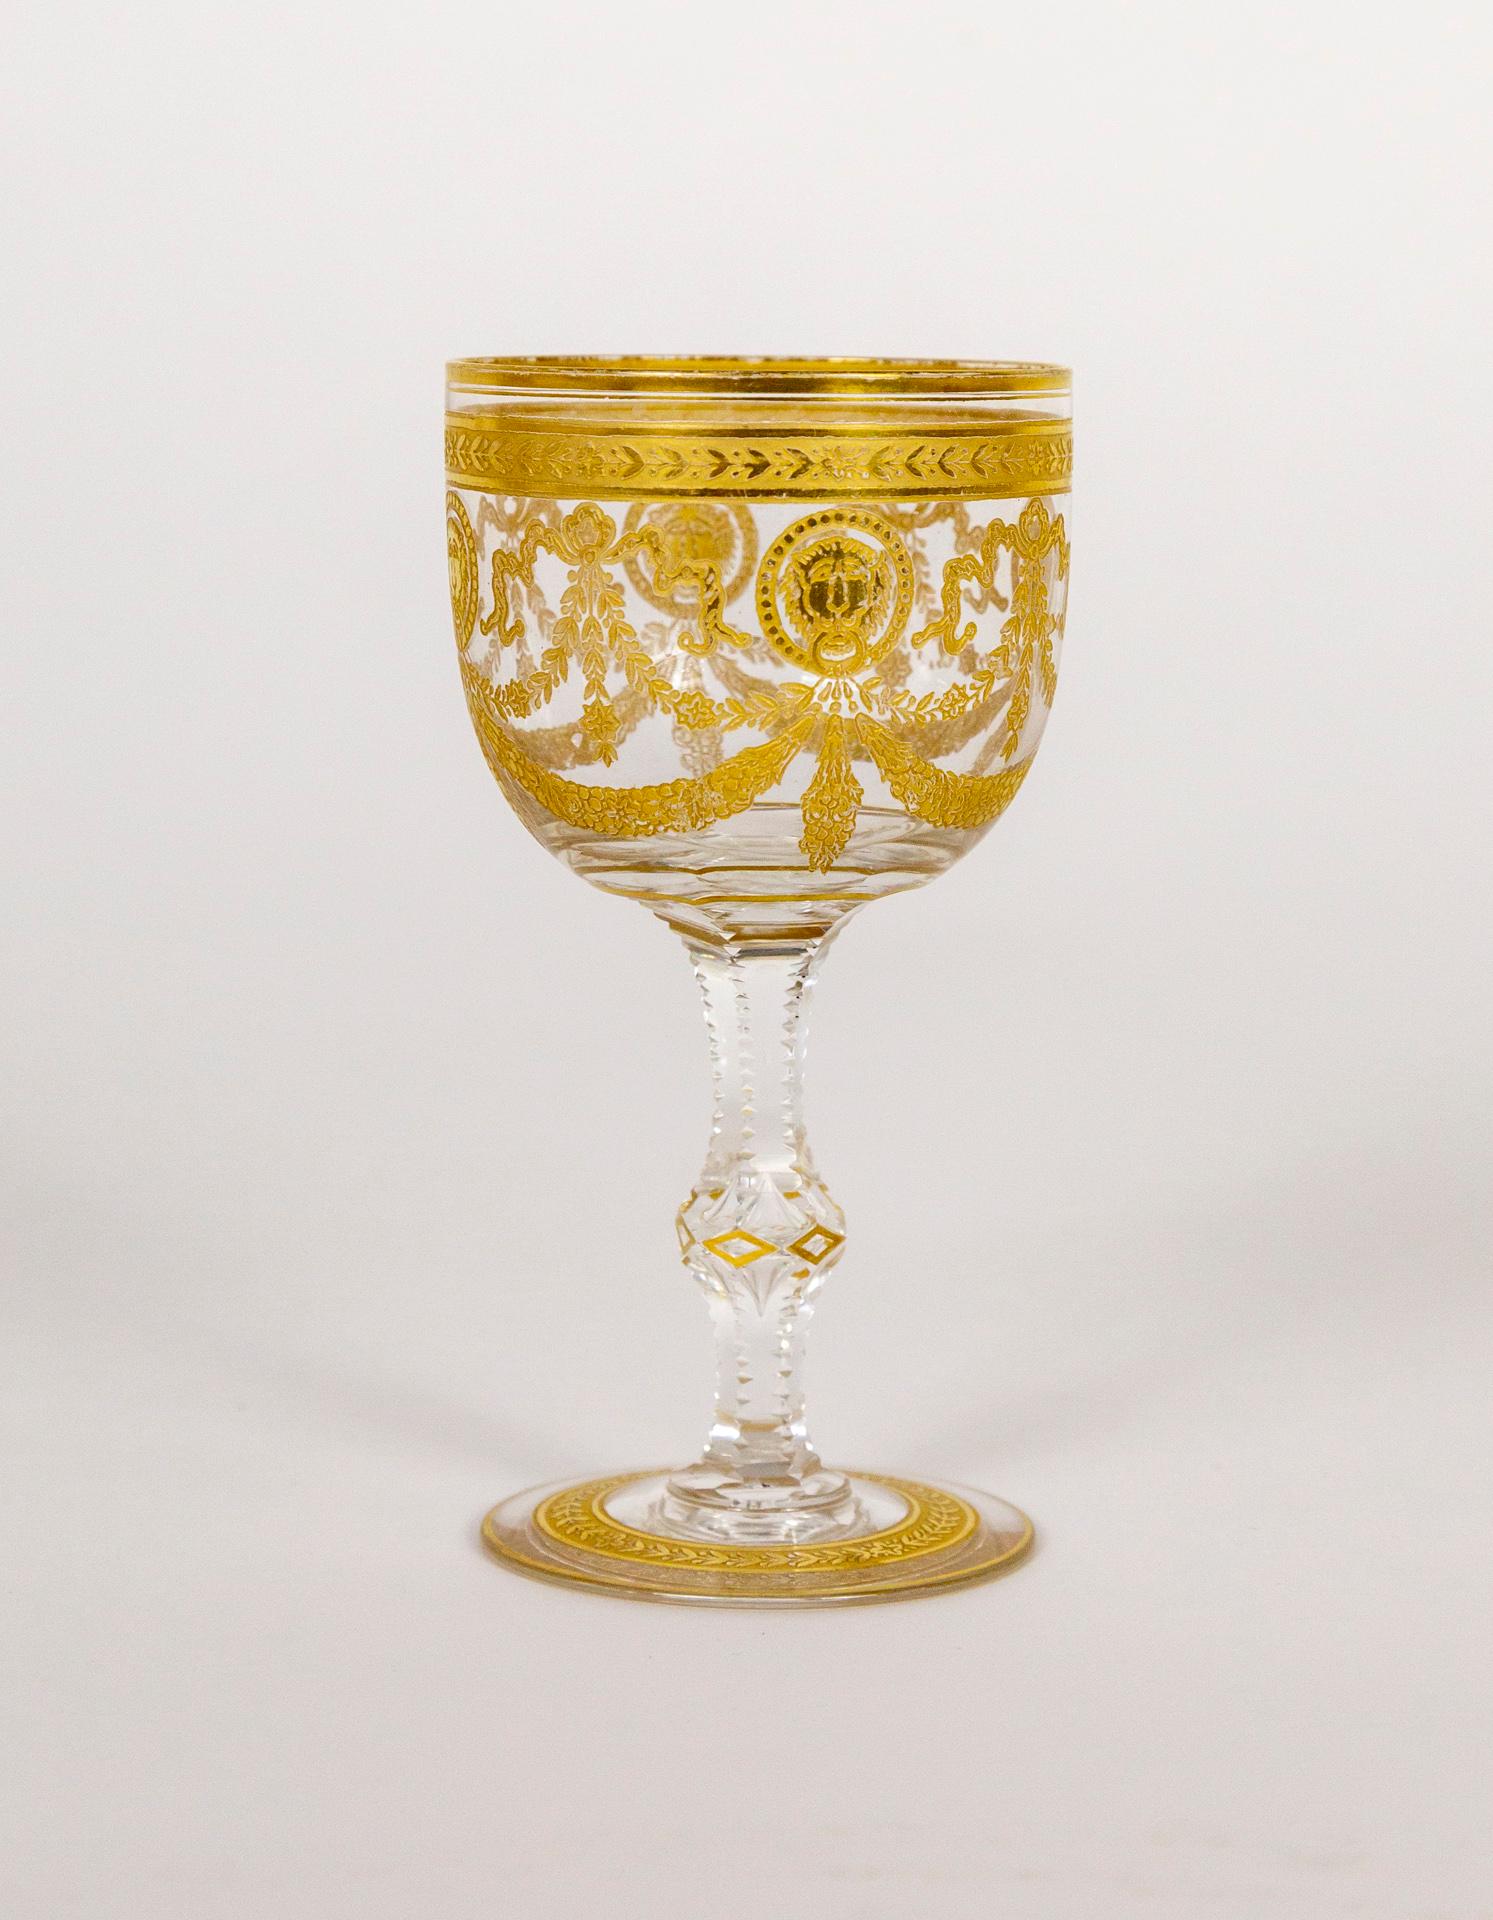 An antique, mouthblown, crystal wine glass, cut and etched, with an intricate gold motif of ribbon, floral garlands, and lion faces. Made by the renowned St. Louis glass company in France in the early 1900s. 4 7/8